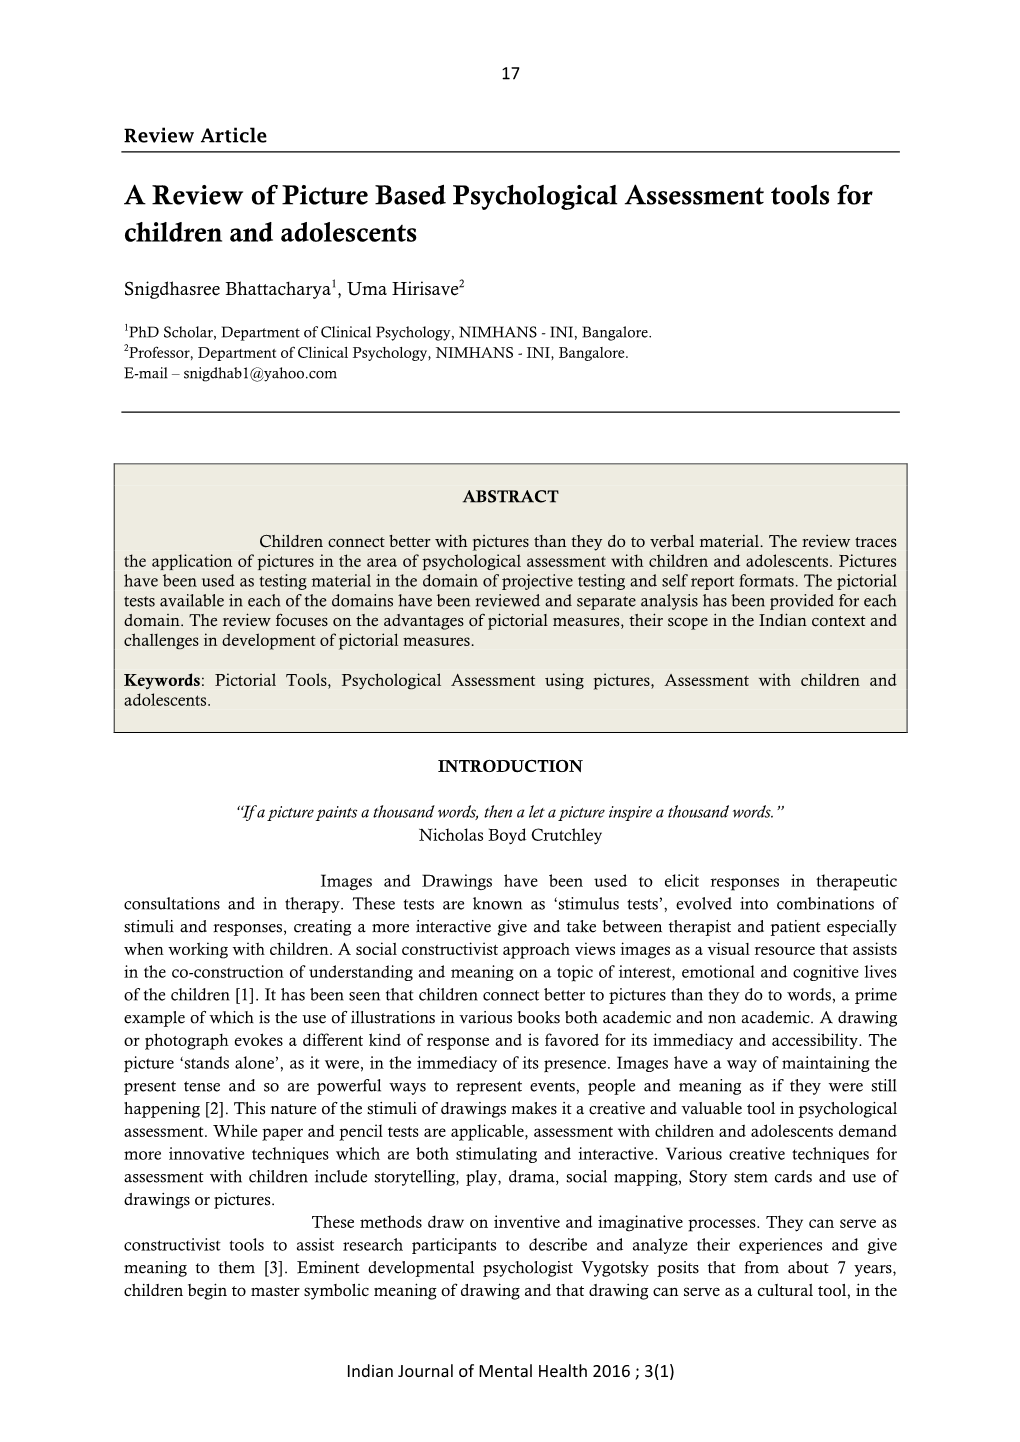 A Review of Picture Based Psychological Assessment Tools for Children and Adolescents